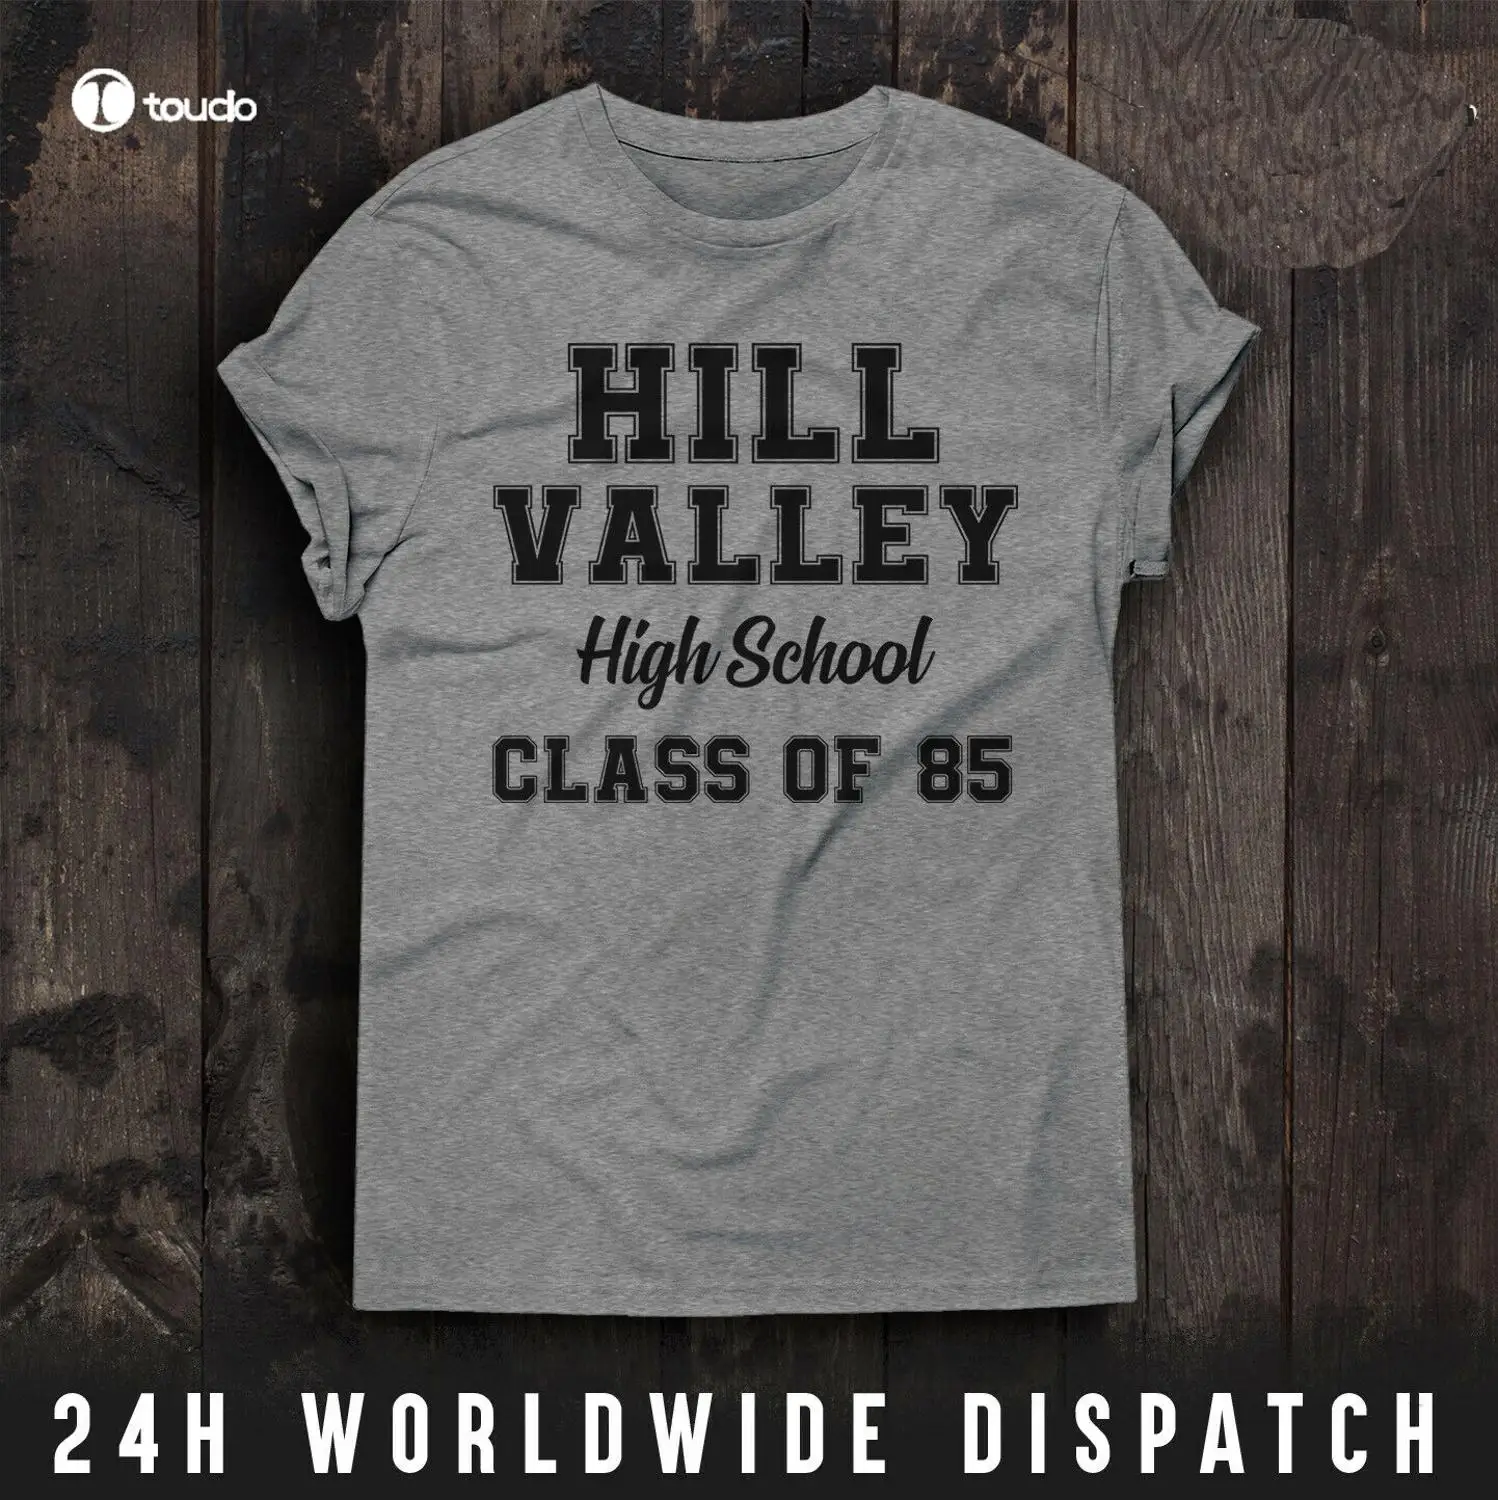 

To The Future T Shirt Hill Valley High School Marty Mcfly Doc Emmett Brown